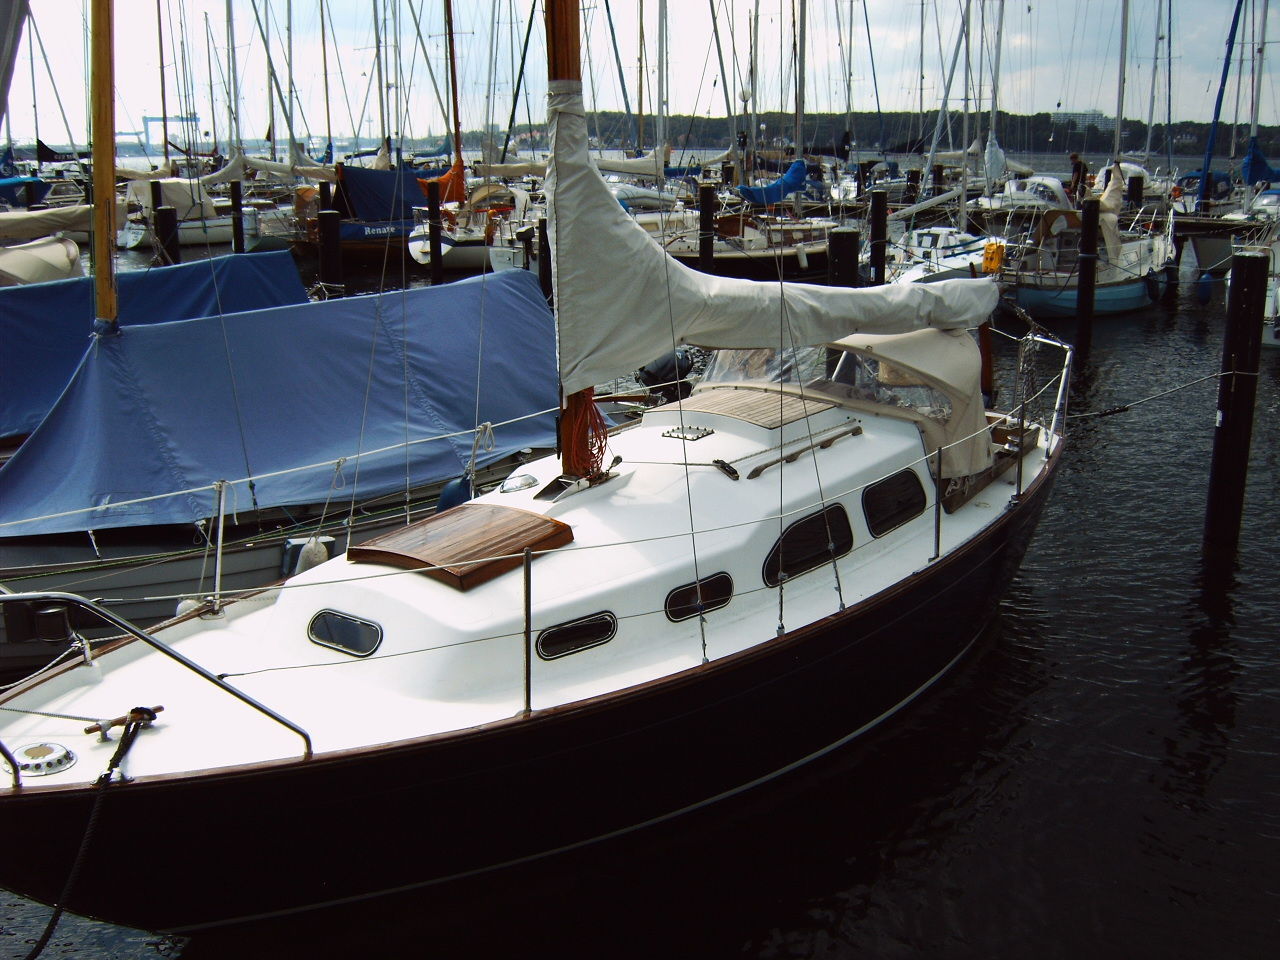 bianca 27 sailboat for sale